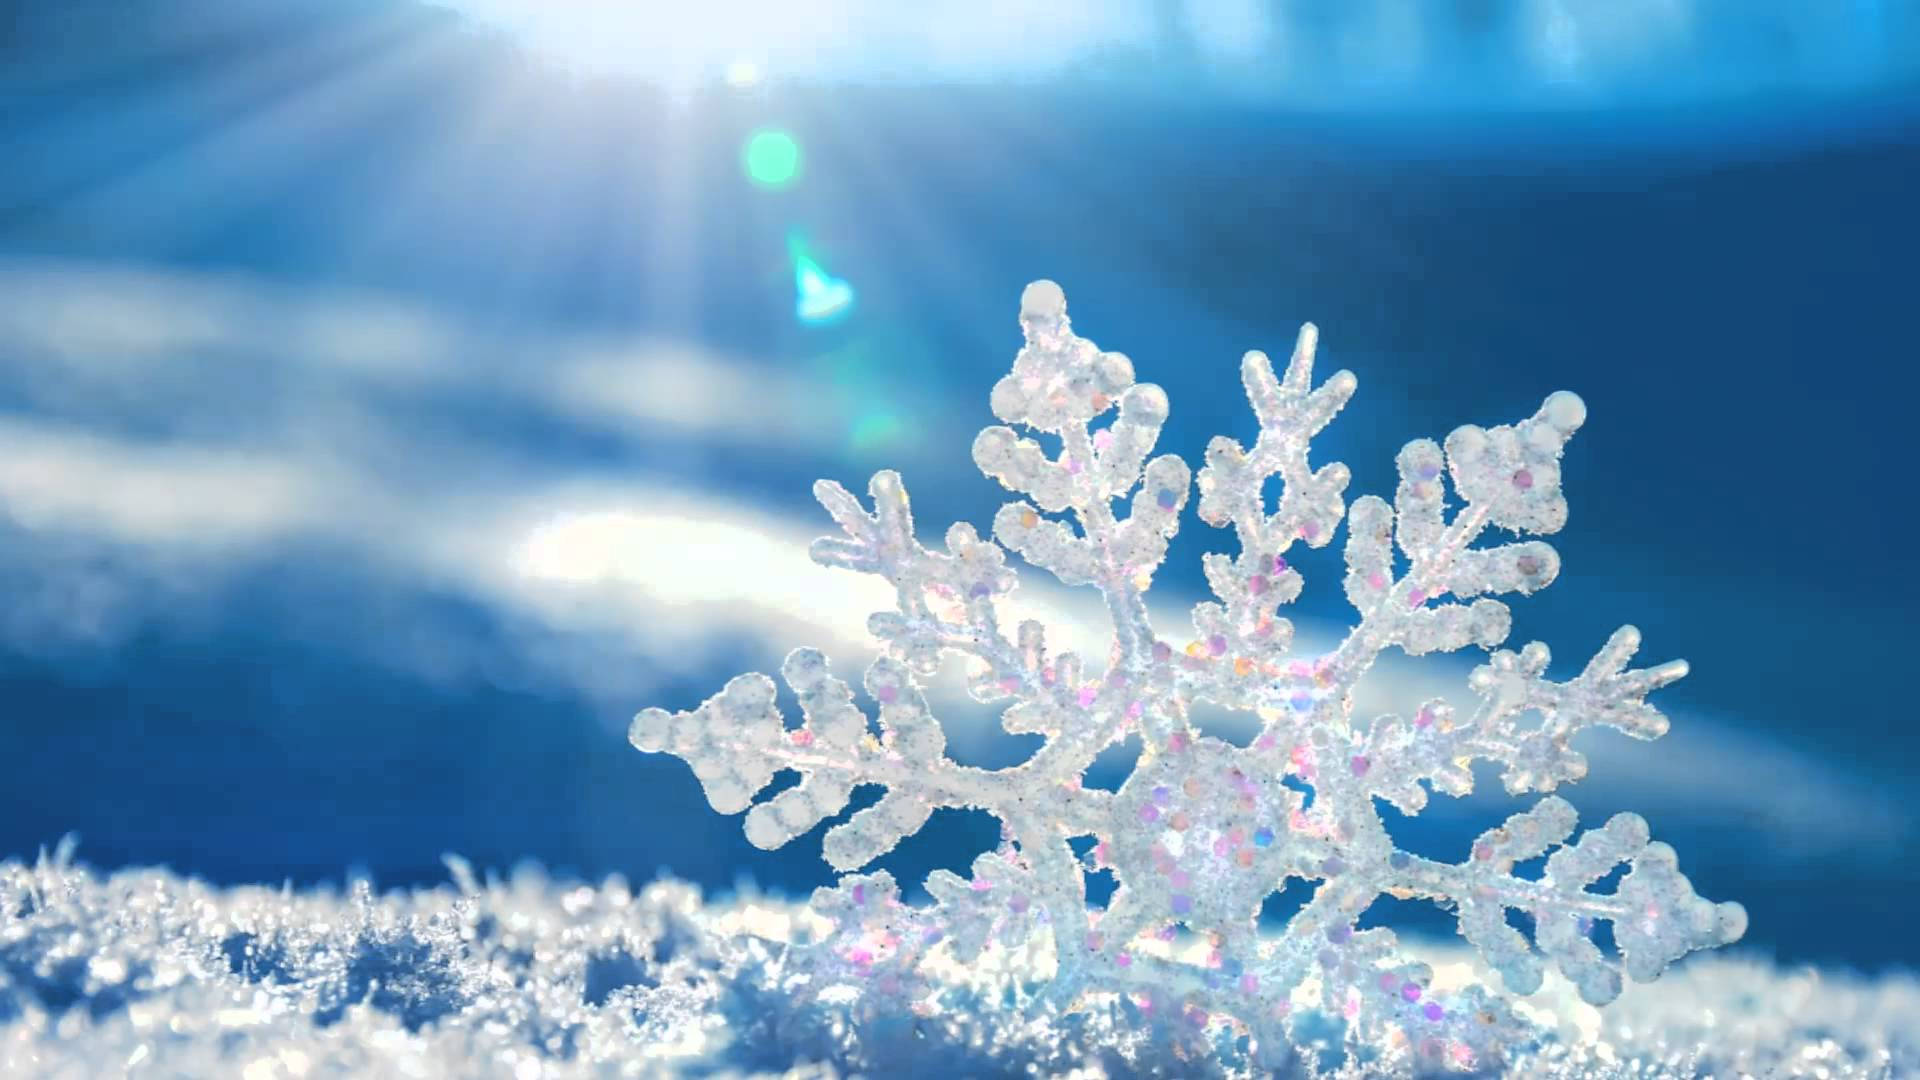 Free Winter Wallpaper Downloads, [700+] Winter Wallpapers for FREE |  